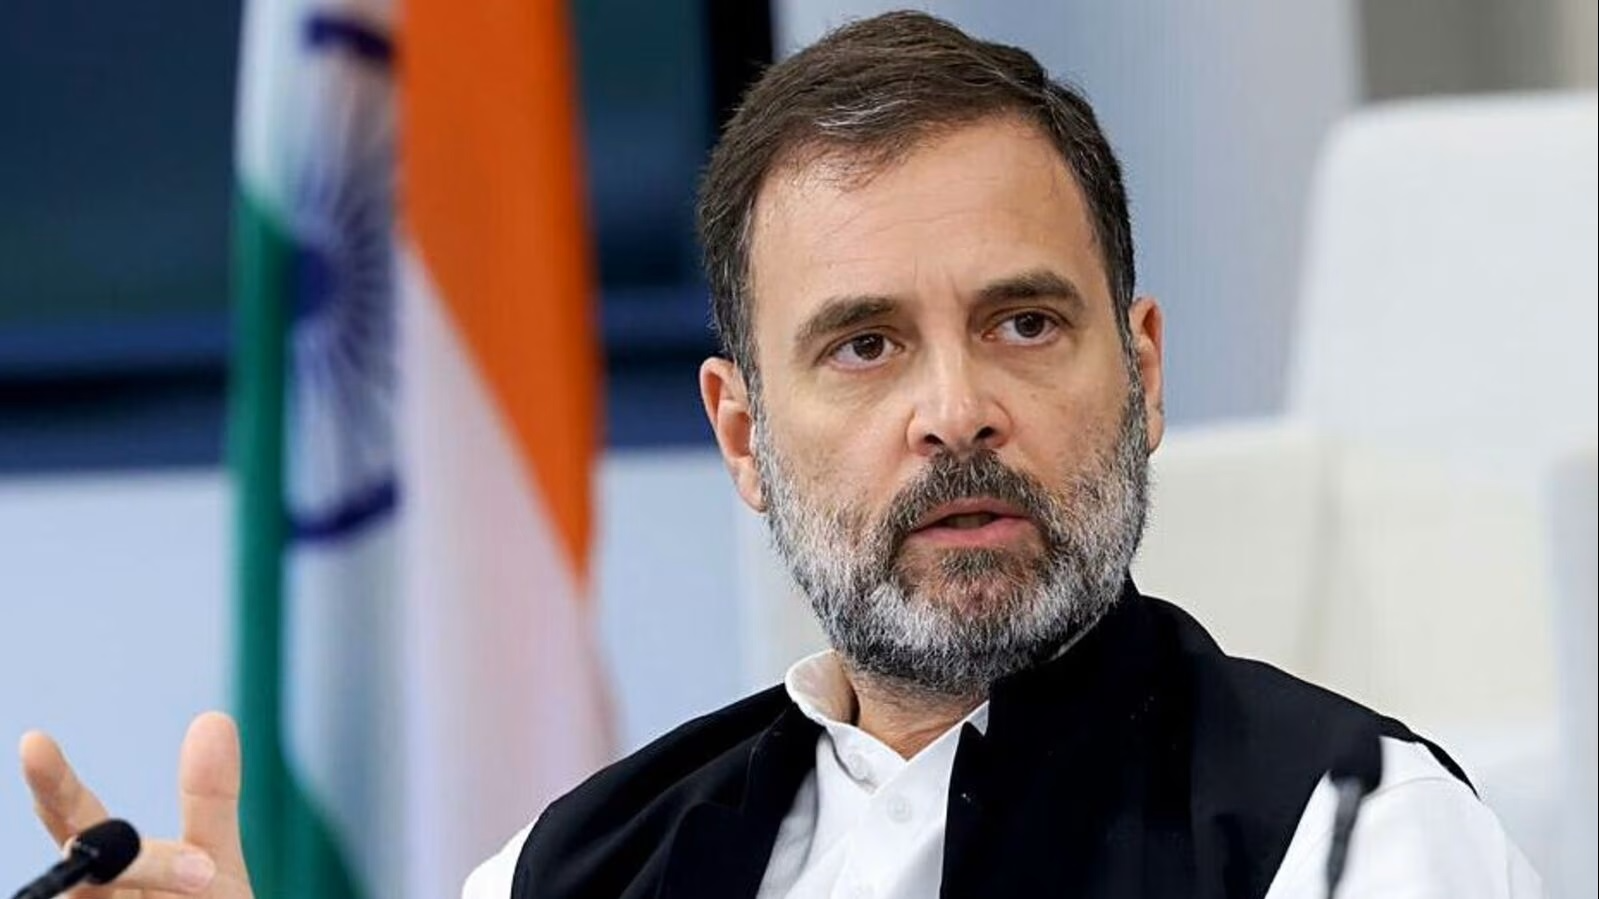 Prime Minister Narendra Modi on Friday said artificial intelligence (AI) presents a huge opportunity but there is a significant risk of misuse, especially deepfakes, if such a powerful technology is placed in unskilled hands.